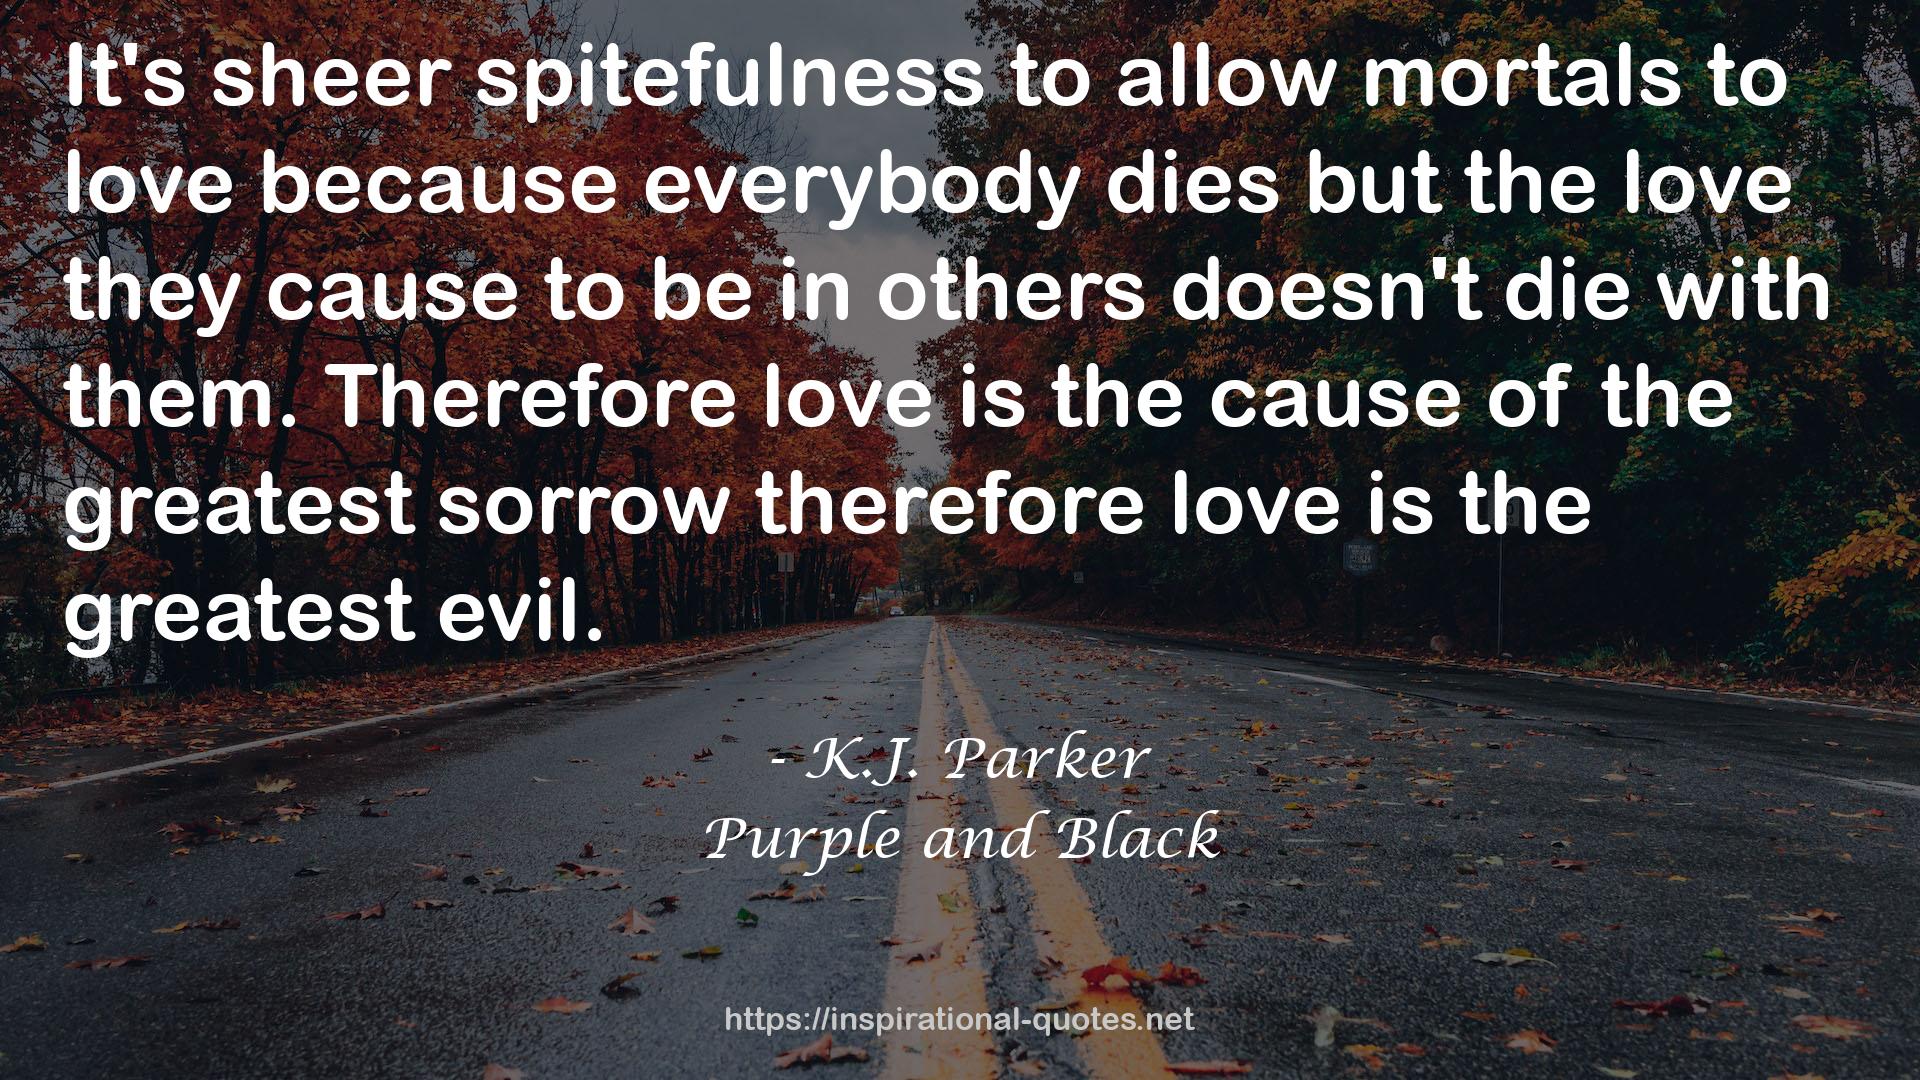 Purple and Black QUOTES